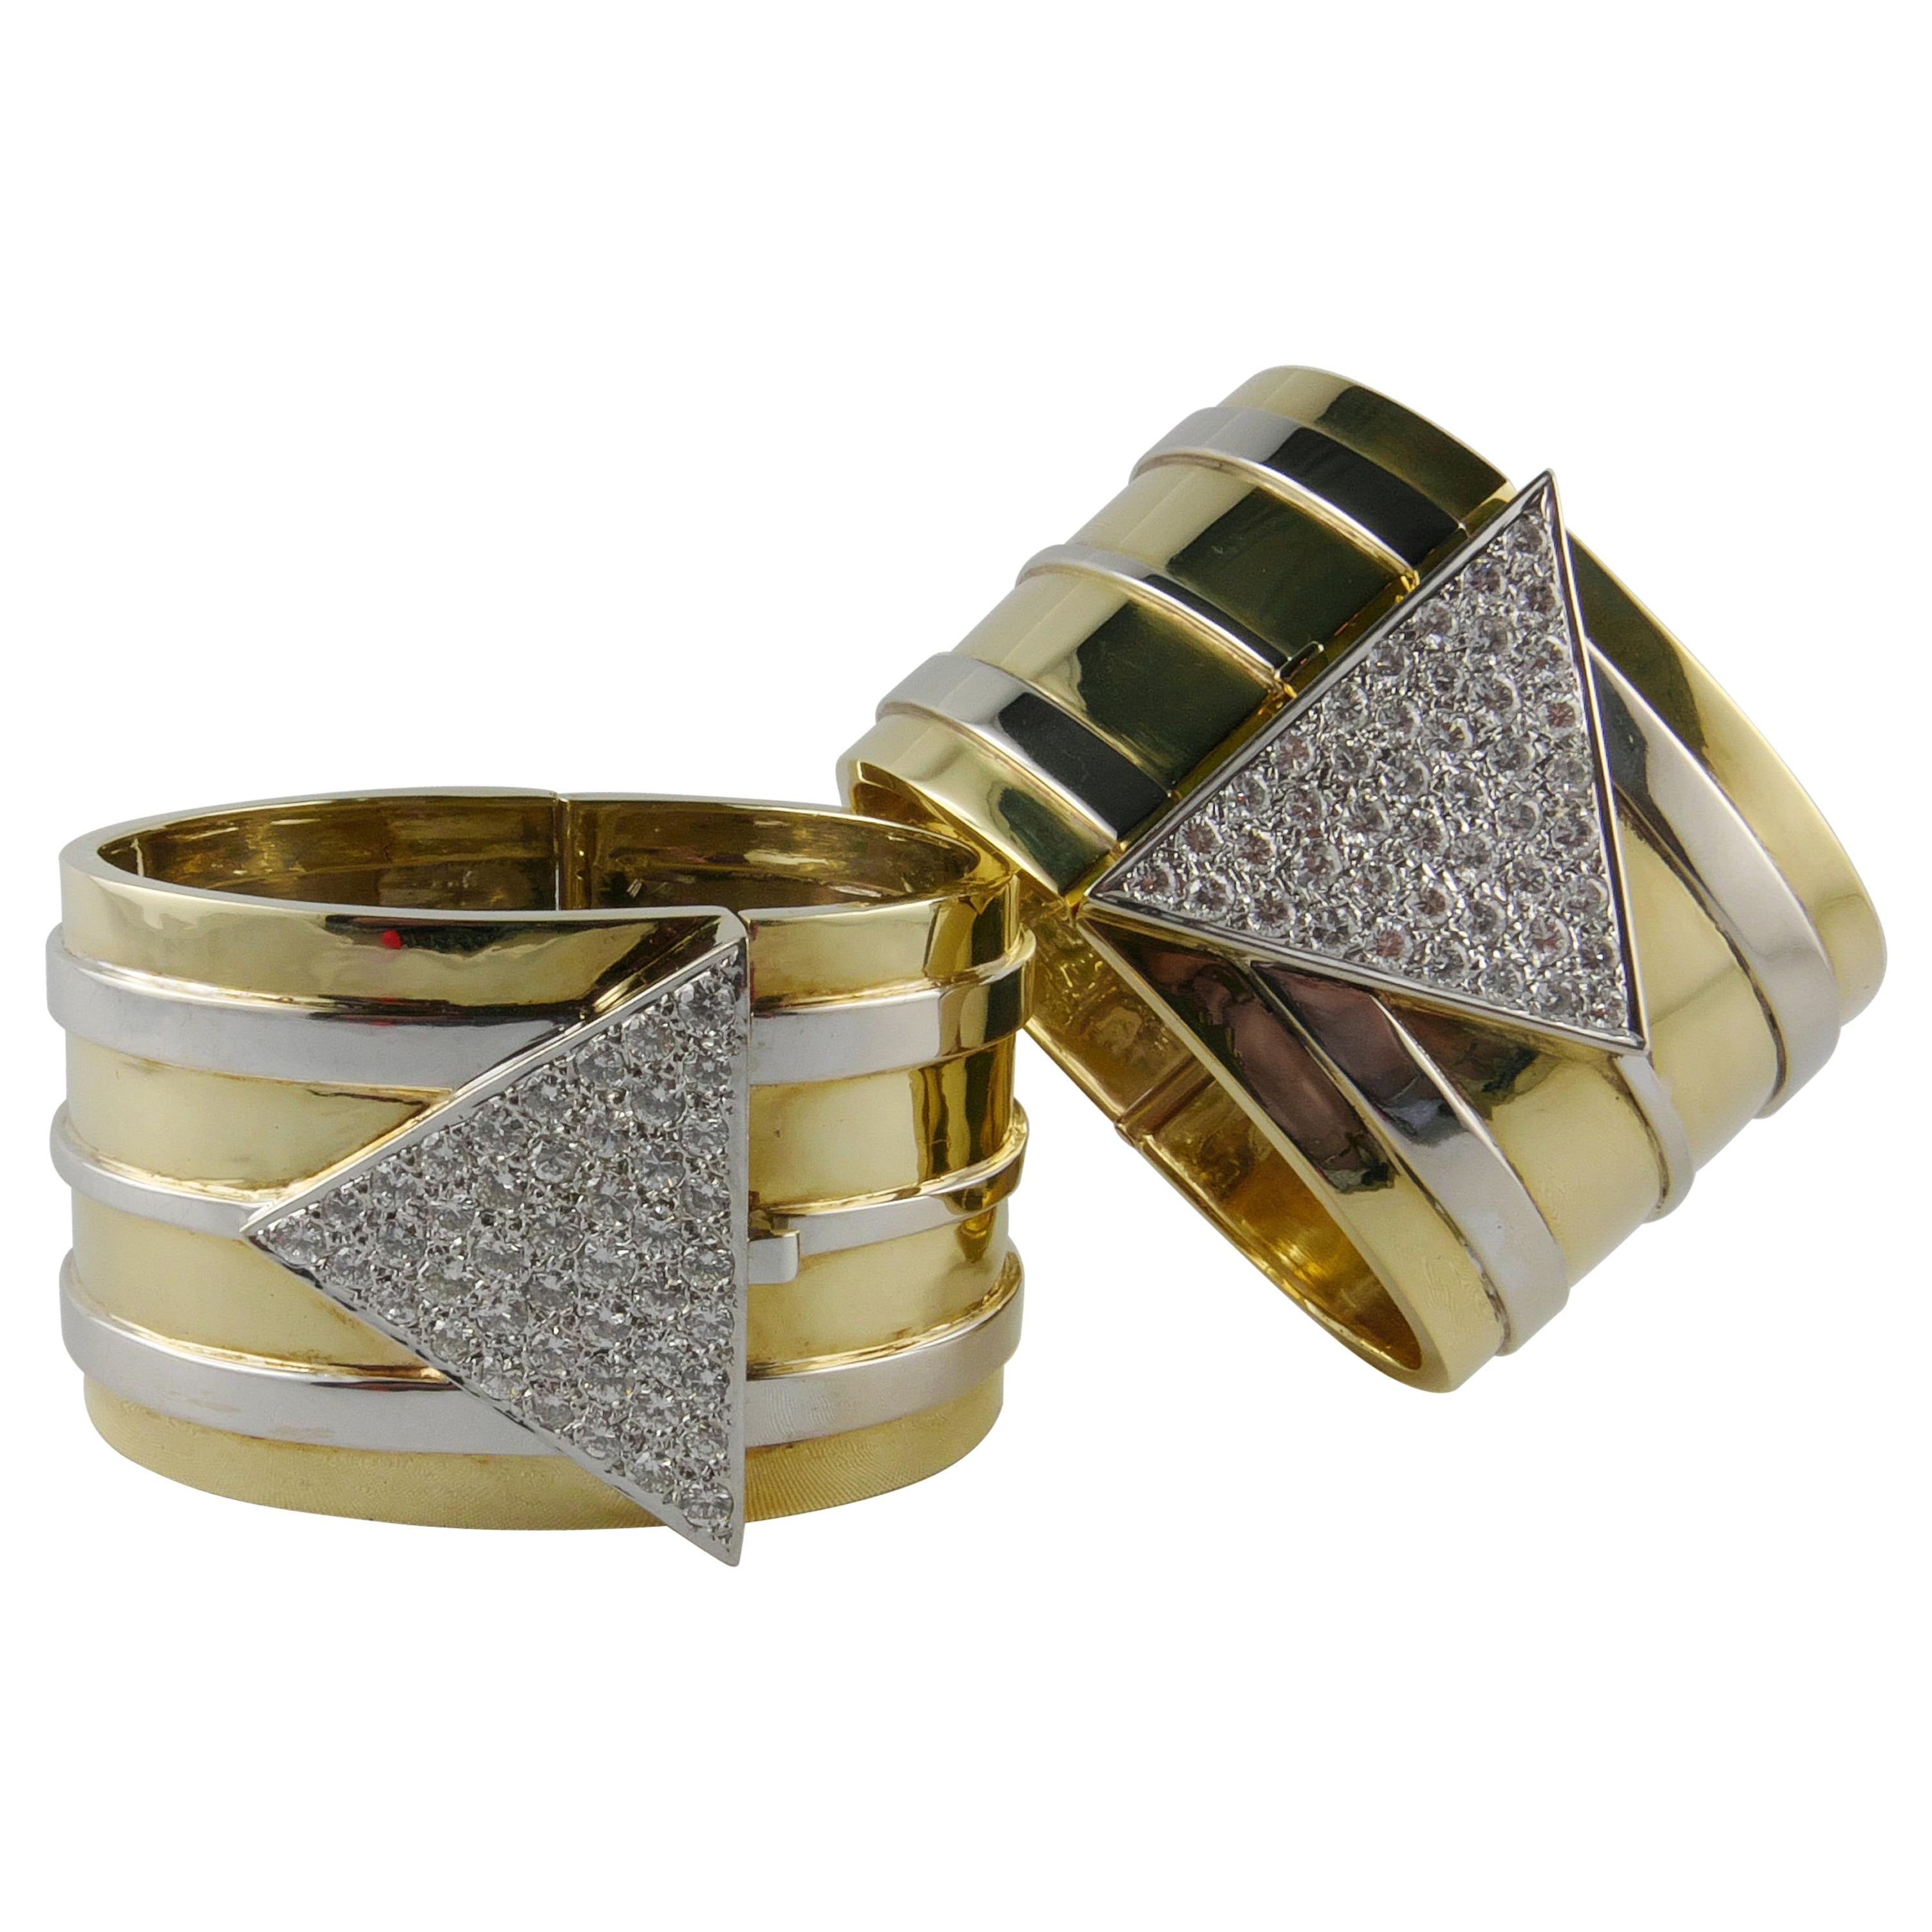 1970s Pair of Gold and Diamond Cuffs